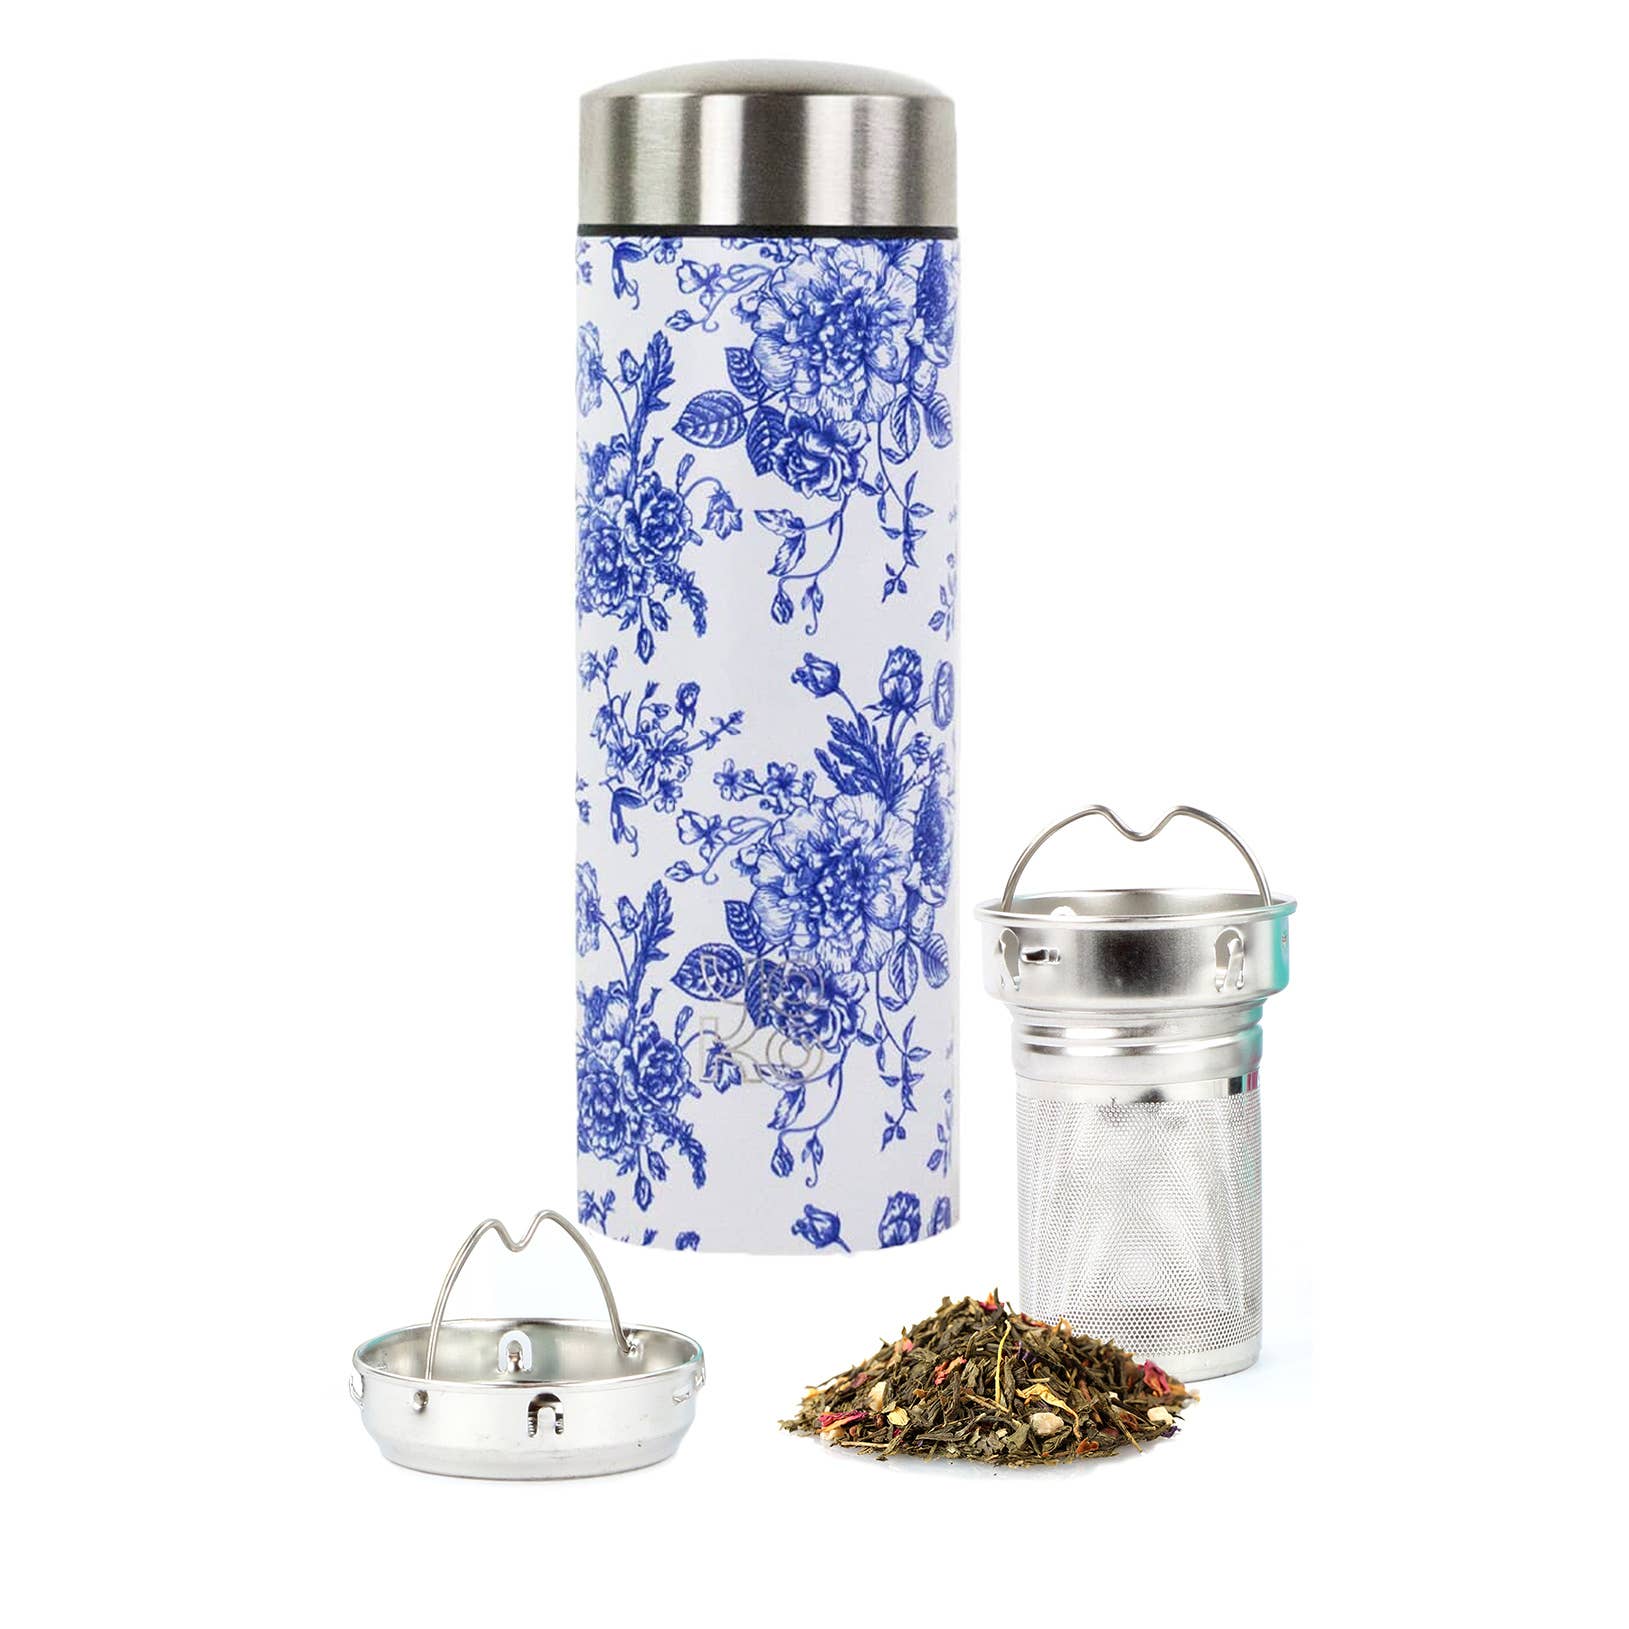 "Toile de Jouy" Elegance Insulated Teapot Thermos – 350ml